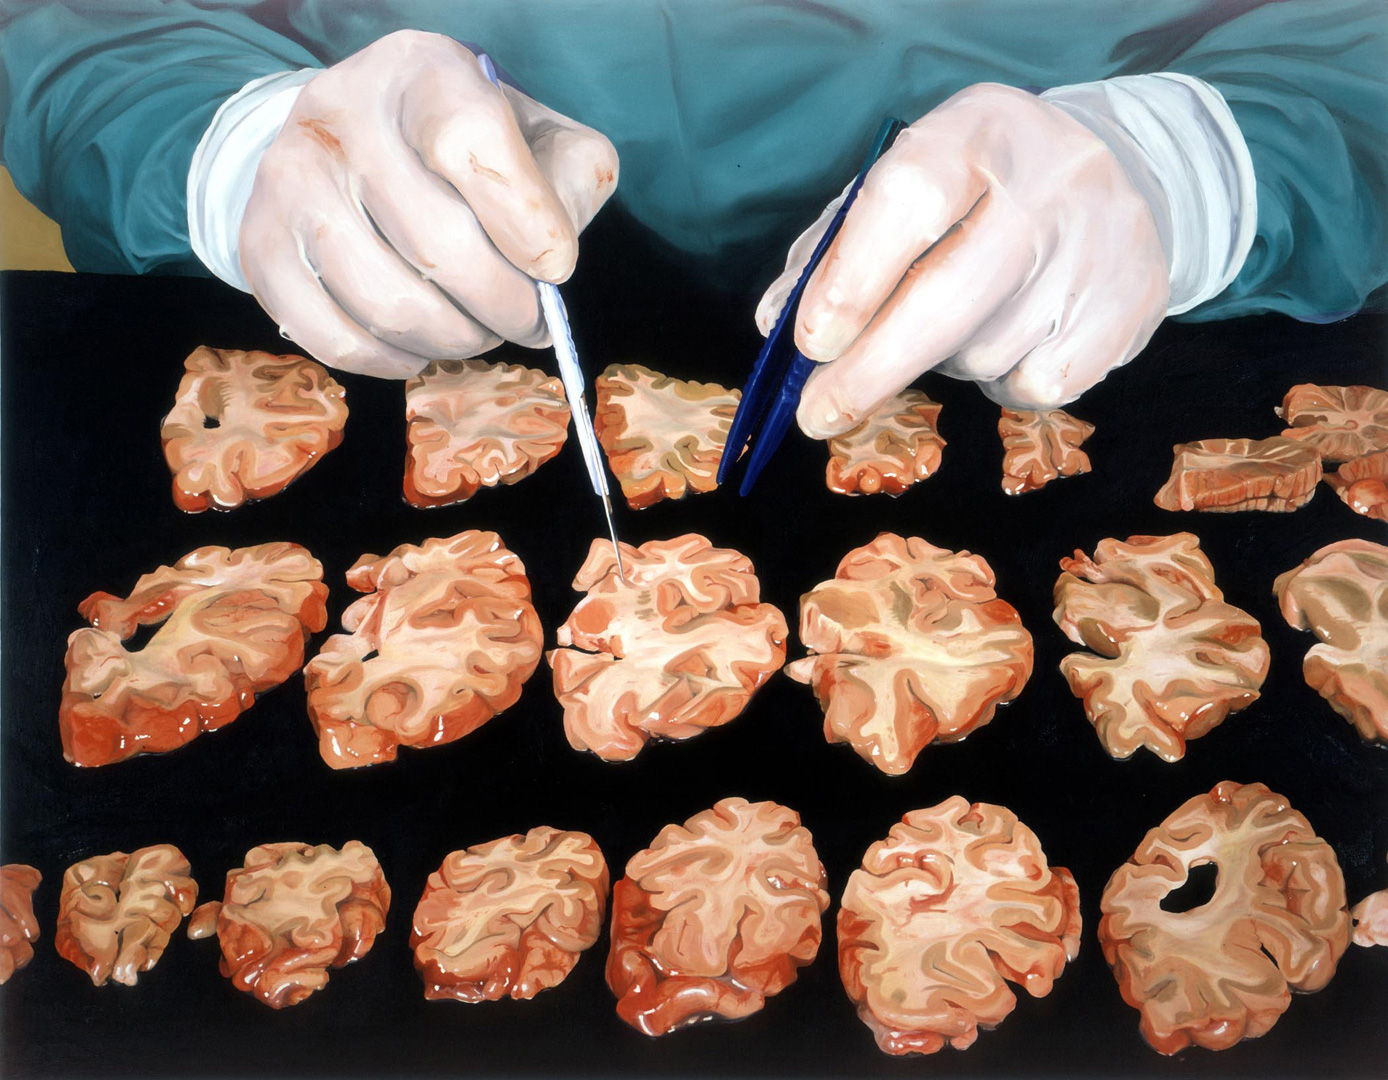 Damien Hirst - Autopsy with Sliced Human Brain, 2004, oil on canvas